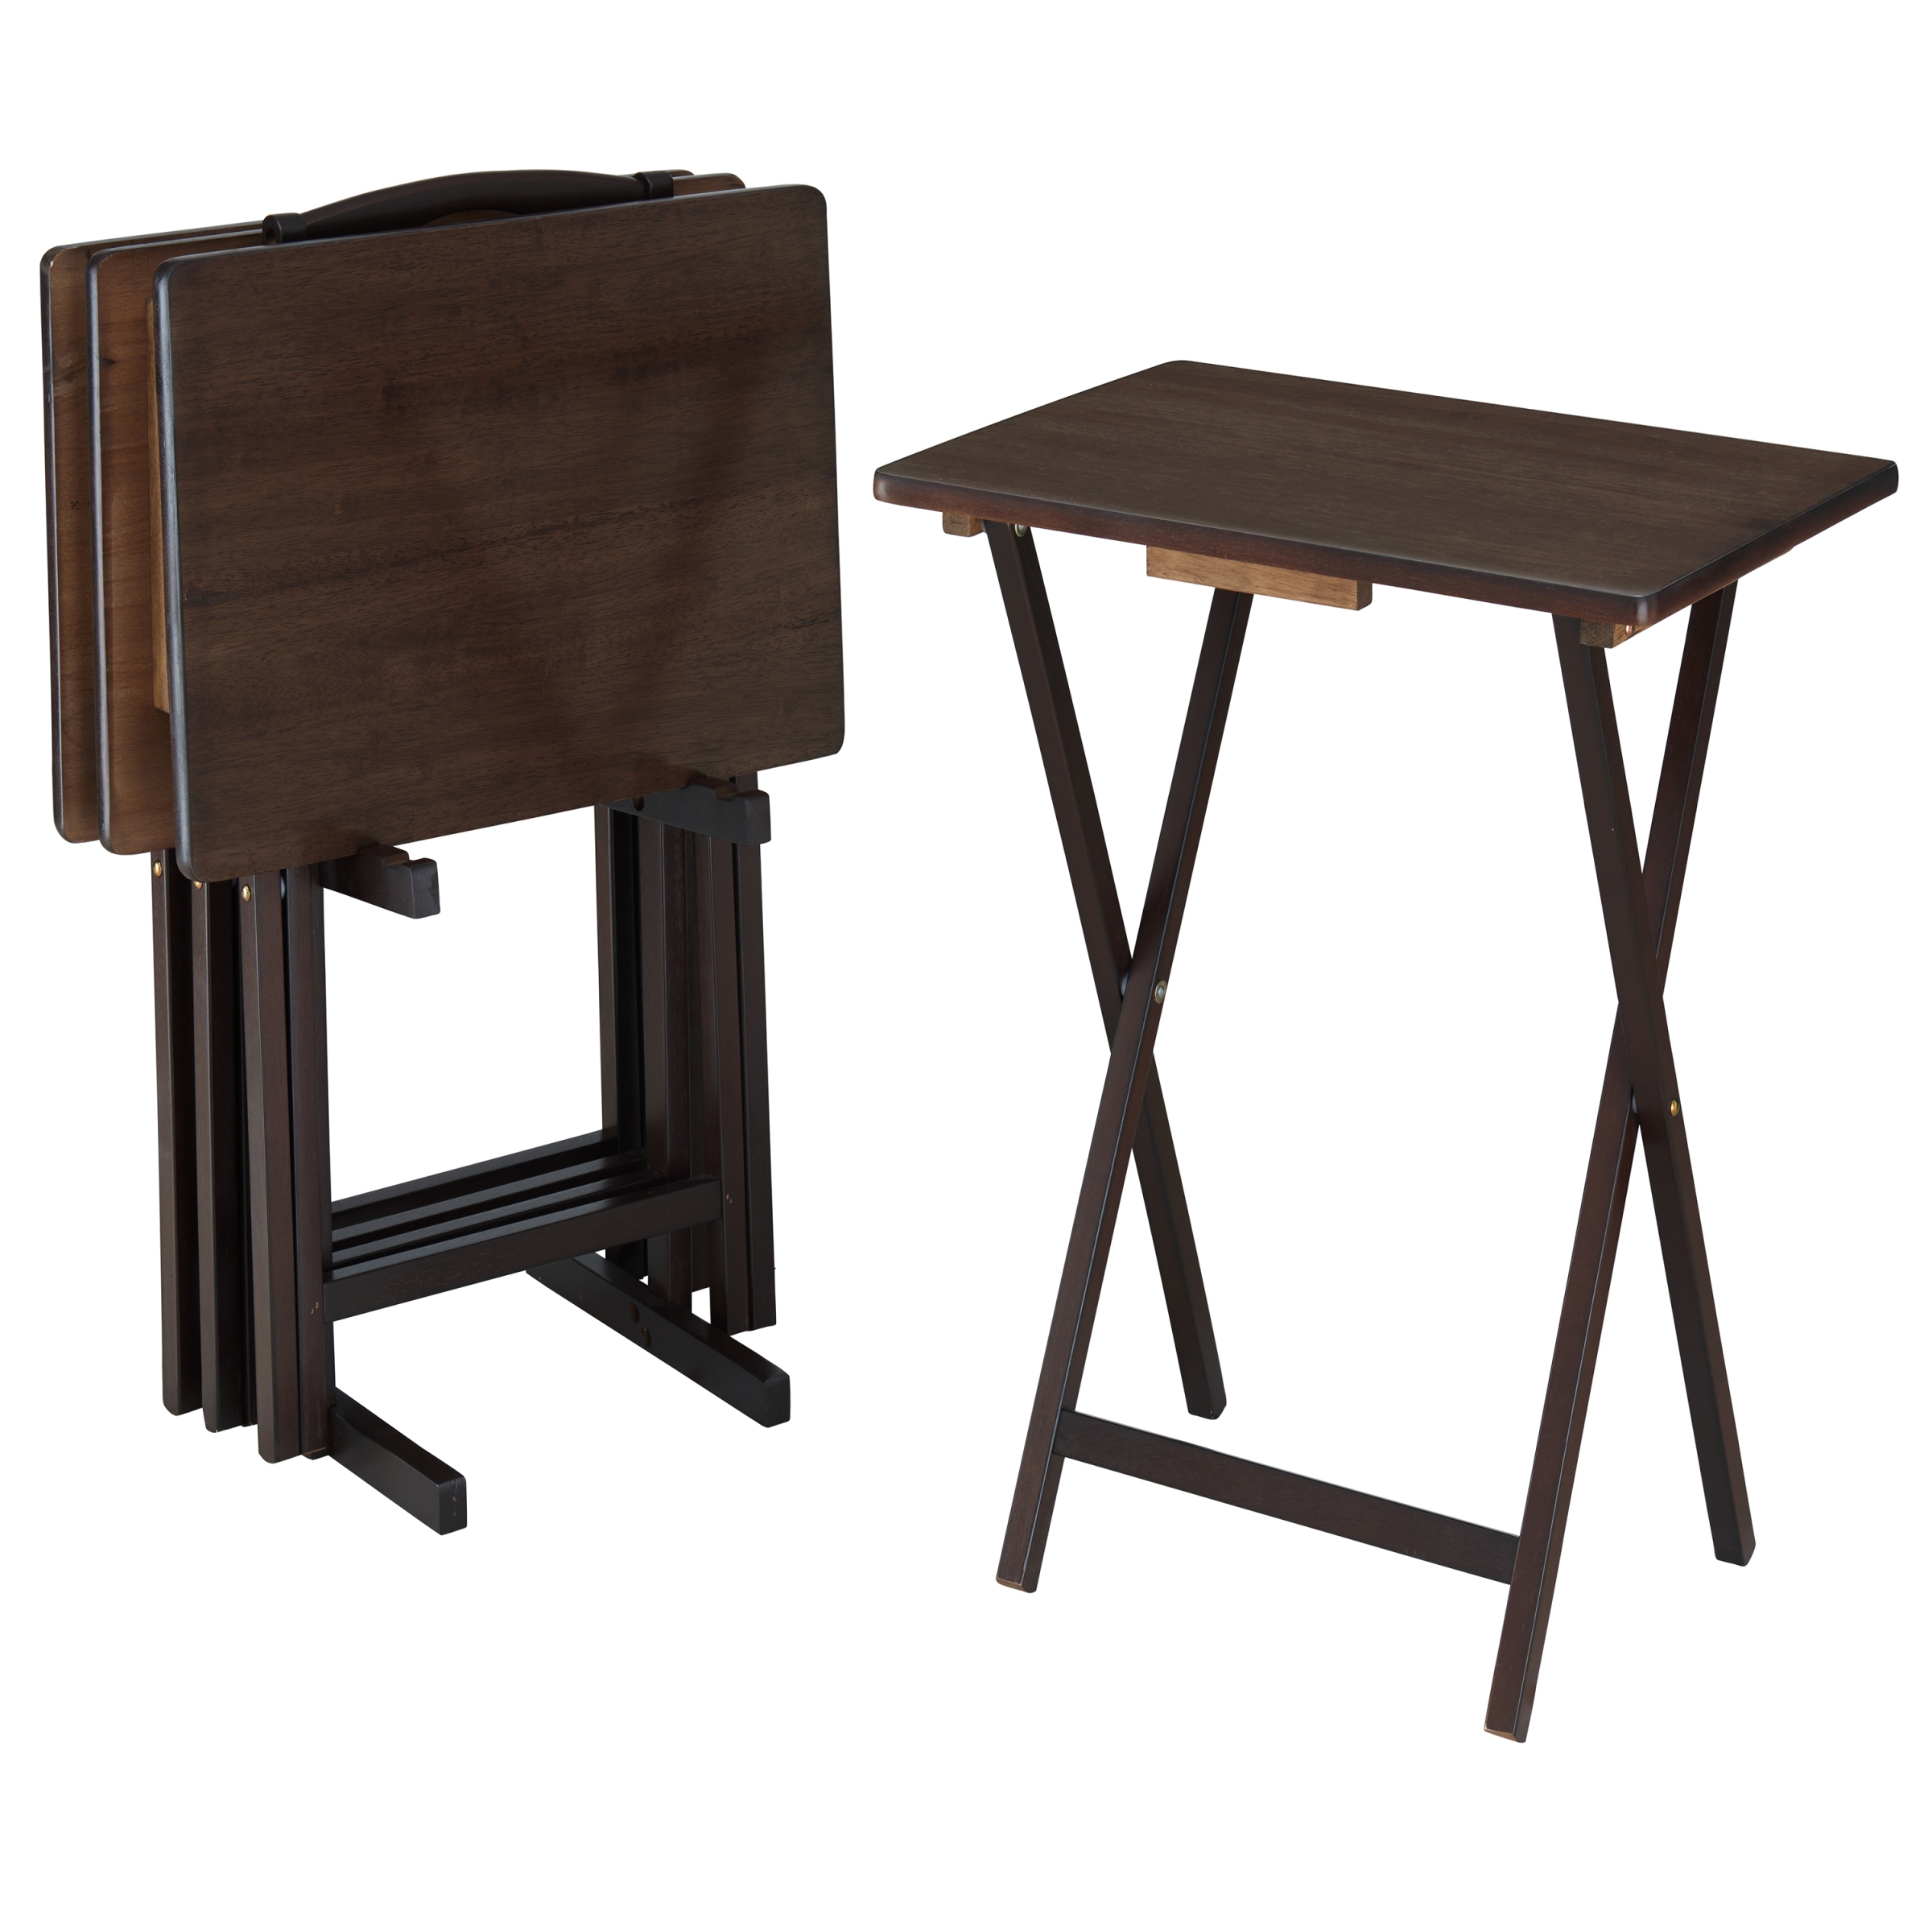 Mainstays Indoor Folding Table Set of 4 in Walnut L19 x W15 x H26 inches. 4 Tables+1 Rack Stand. - image 1 of 5